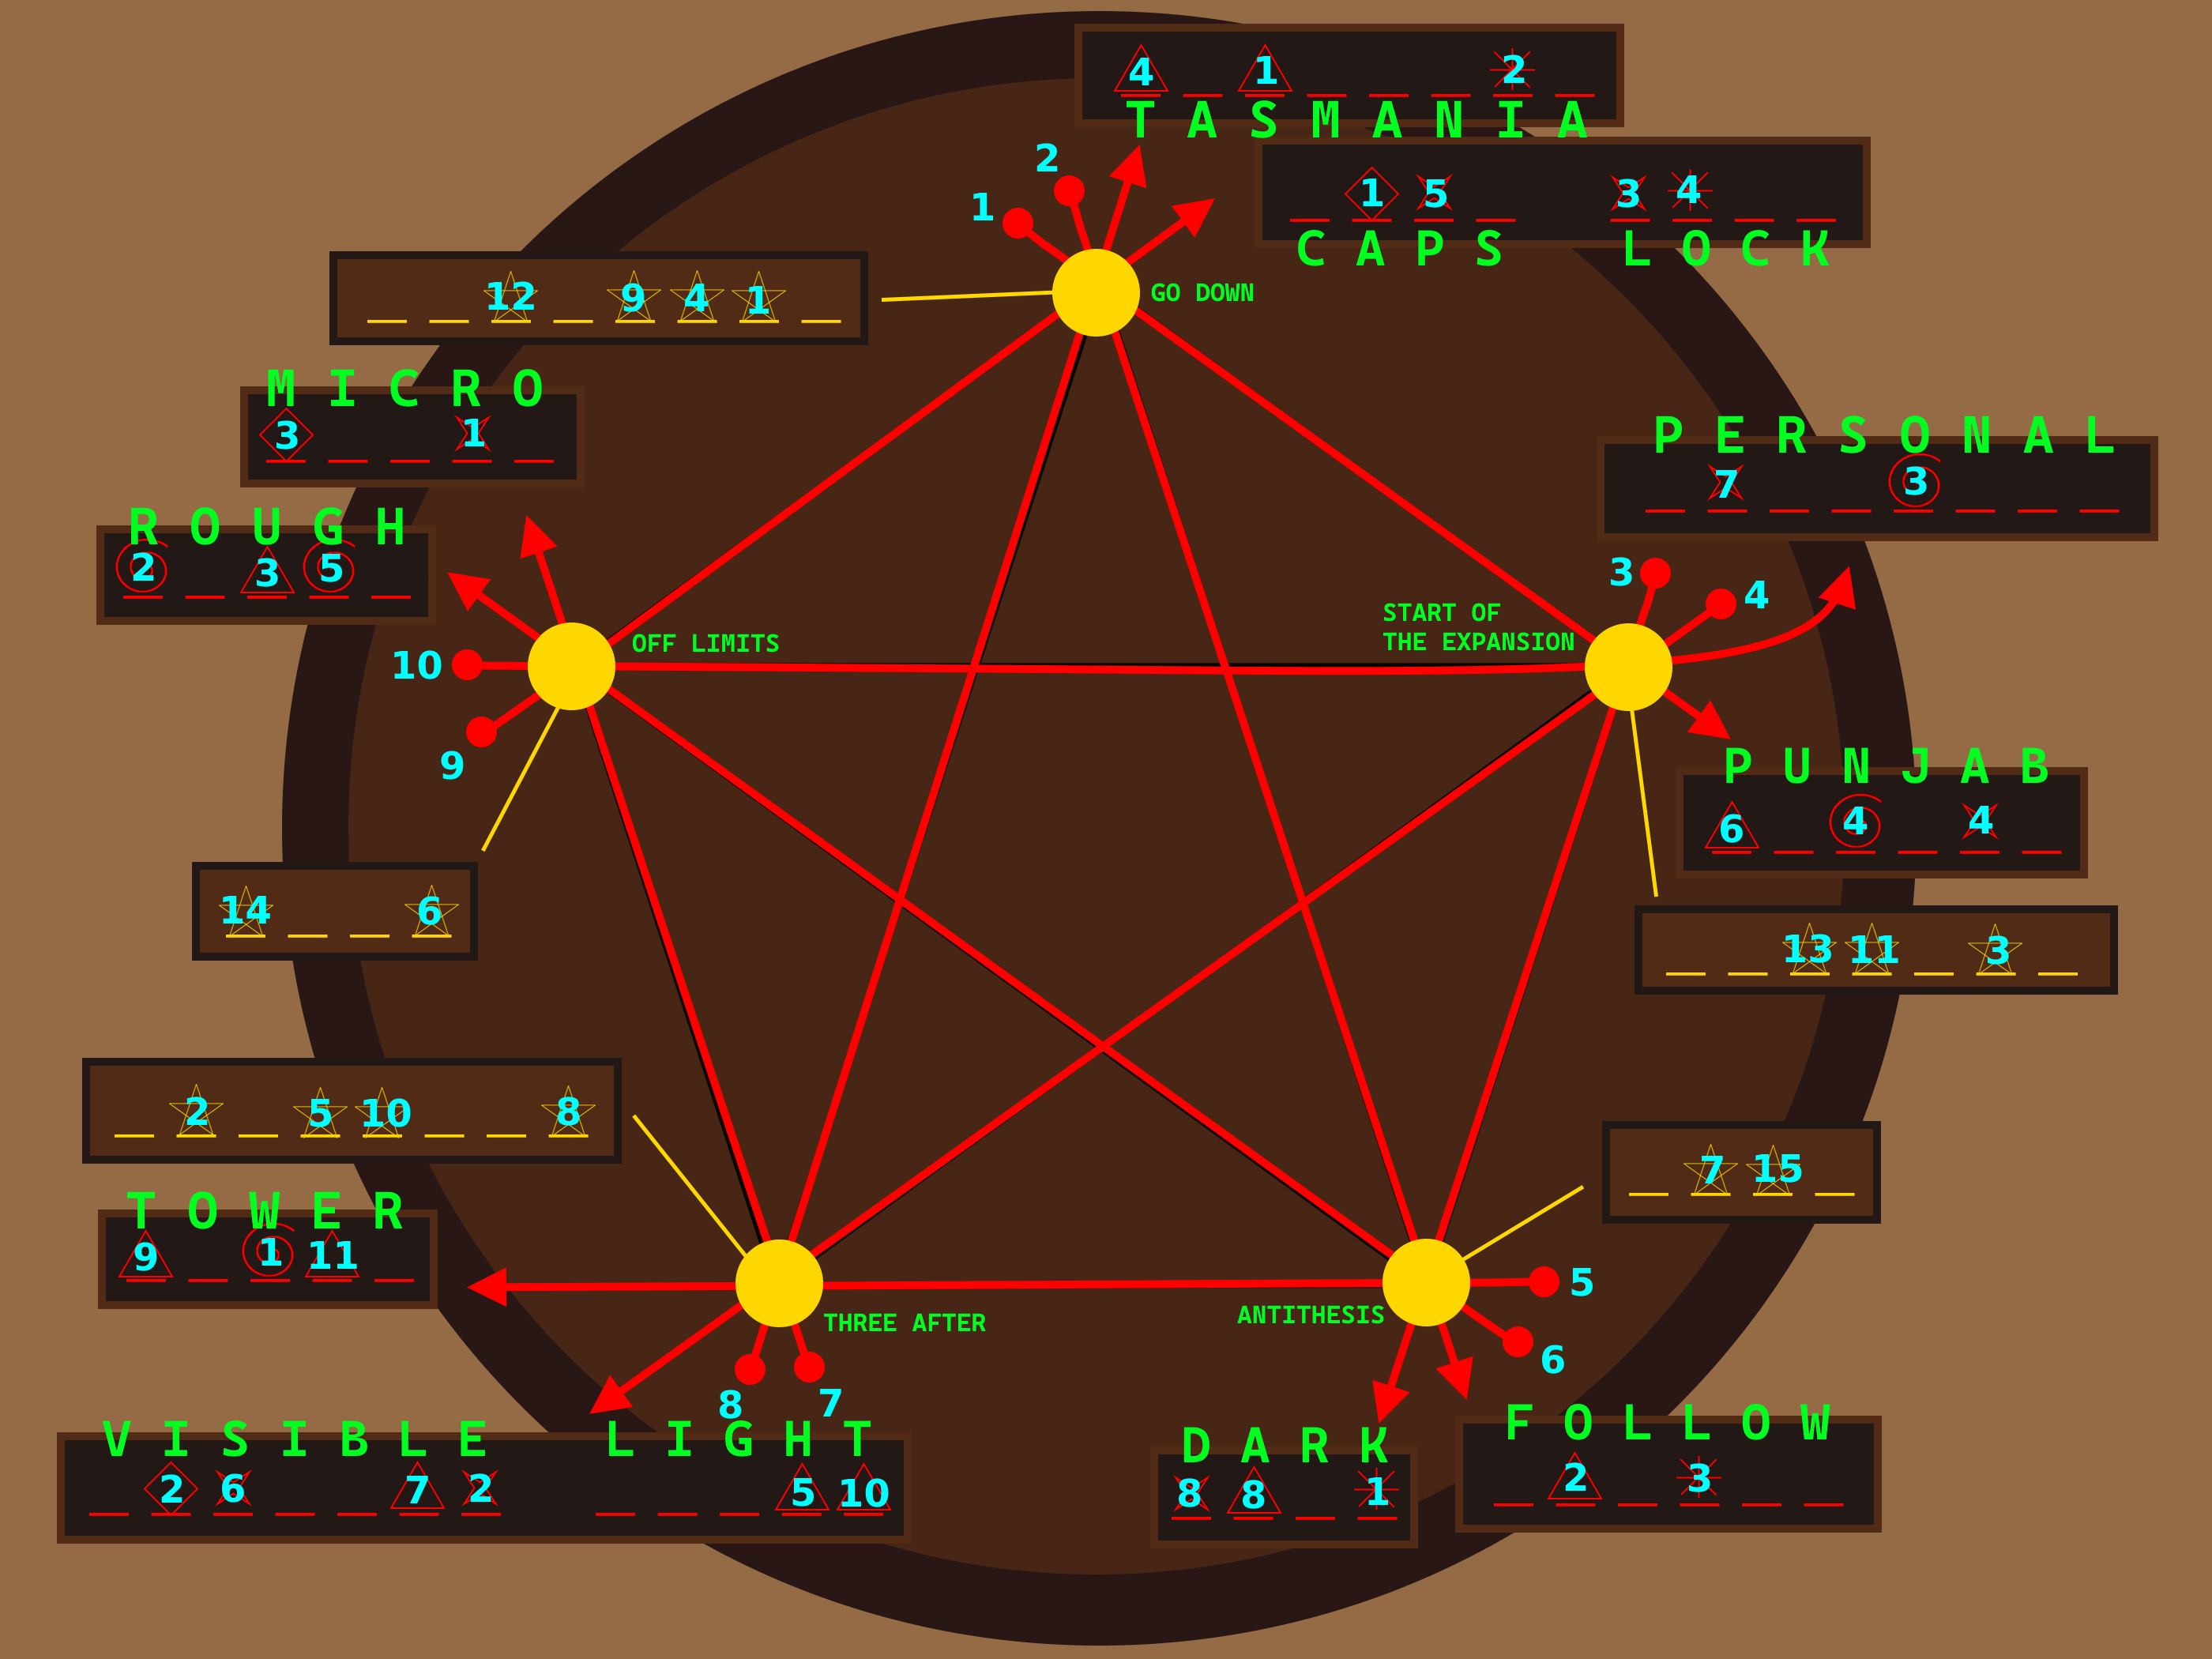 For a transcript of this alt-text, you may email contact@huntinality.com.

5 yellow nodes in a pentagon. Red lines connect each node to all of the other nodes, forming a five-pointed star inside a pentagon.
For the sake of this description, the node at the top of the pentagon will be referred to as Node 1, and the others will be numbered 2, 3, 4, and 5, going clockwise.

Brown boxes containing yellow blanks are connected by yellow lines to each of the nodes. Some of the blanks have yellow 5-pointed stars with blue numbers written on them.
Node 1's box has 8 blanks. The 3rd blank has a 12, the 5th blank has a 9, the 6th blank has a 4, and the 7th blank has a 1.
Node 2's has 7 blanks. The 3rd blank has a 13, the 4th blank has an 11, and the 6th blank has a 3.
Node 3's has 4 blanks. The 2nd blank has a 7 and the 3rd blank has a 15.
Node 4's has 8 blanks. The 2nd blank has a 2, the 4th blank has a 5, the 5th blank has a 10, and the 8th blank has an 8.
Node 5's has 4 blanks. The 1st blank has a 14 and the 4th blank has a 6.

A red arrow begins at a red circle labeled with a blue 1, travels through Node 1 and Node 2, then ends, pointing toward a brown box. The box has 6 red blanks, some of which contain red shapes with blue numbers written on them.
The 1st blank has a triangle labeled 6, the 3rd blank has a spiral labeled 4, and the 5th blank has a 4-pointed star labeled 4.

A red arrow begins at a red circle labeled with a blue 2, travels through Node 1 and Node 3, then ends, pointing toward a brown box. The box has 6 red blanks.
The 2nd blank has a triangle labeled 2 and the 4th blank has an asterisk labeled 3.

A red arrow begins at a red circle labeled with a blue 3, travels through Node 2 and Node 3, then ends, pointing toward a brown box. The box has 4 red blanks.
The 1st blank has a 4-pointed star labeled 8, the 2nd blank has a triangle labeled 8, and the 4th blank has an asterisk labeled 1.

A red arrow begins at a red circle labeled with a blue 4, travels through Node 2 and Node 4, then ends, pointing toward a brown box. The box has 7 red blanks, then a space, then 5 red blanks.
The 2nd blank has a diamond labeled 2, the 3rd blank has a 4-pointed star labeled 6, the 6th blank has a triangle labeled 7, the 7th blank has a 4-pointed star labeled 2, the 11th blank has a triangle labeled 5, and the 12th blank has a triangle labeled 10.

A red arrow begins at a red circle labeled with a blue 5, travels through Node 3 and Node 4, then ends, pointing toward a brown box. The box has 5 red blanks.
The 1st blank has a triangle labeled 9, the 3rd blank has a spiral labeled 1, and the 4th blank has a triangle labeled 11.

A red arrow begins at a red circle labeled with a blue 6, travels through Node 3 and Node 5, then ends, pointing toward a brown box. The box has 5 red blanks.
The 1st blank has a spiral labeled 2, the 3rd box has a triangle labeled 3, and the 4th box has a spiral labeled 5.

A red arrow begins at a red circle labeled with a blue 7, travels through Node 4 and Node 5, then ends, pointing toward a brown box. The box has 5 red blanks.
The 1st blank has a diamond labeled 3 and the 4th blank has a 4-pointed star labeled 1.

A red arrow begins at a red circle labeled with a blue 8, travels through Node 4 and Node 1, then ends, pointing toward a brown box. The box has 8 red blanks.
The 1st blank has a triangle labeled 4, the 3rd blank has a triangle labeled 1, and the 7th blank has an asterisk labeled 2.

A red arrow begins at a red circle labeled with a blue 9, travels through Node 5 and Node 1, then ends, pointing toward a brown box. The box has 4 red blanks, a space, then 4 red blanks.
The 2nd blank has a diamond labeled 1, the 5th blank has a 4-pointed star labeled 5, the 5th blank has a 4-pointed star labeled 3, and the 6th blank has an asterisk labeled 4.

A red arrow begins at a red circle labeled with a blue 10, travels through Node 5 and Node 2, then ends, pointing toward a brown box. The box has 8 red blanks.
The 2nd blank has a 4-pointed star labeled 7 and the 5th blank has a spiral labeled 3.

The red blanks have been filled in with the answers. See the table below for a description of the answer paths.